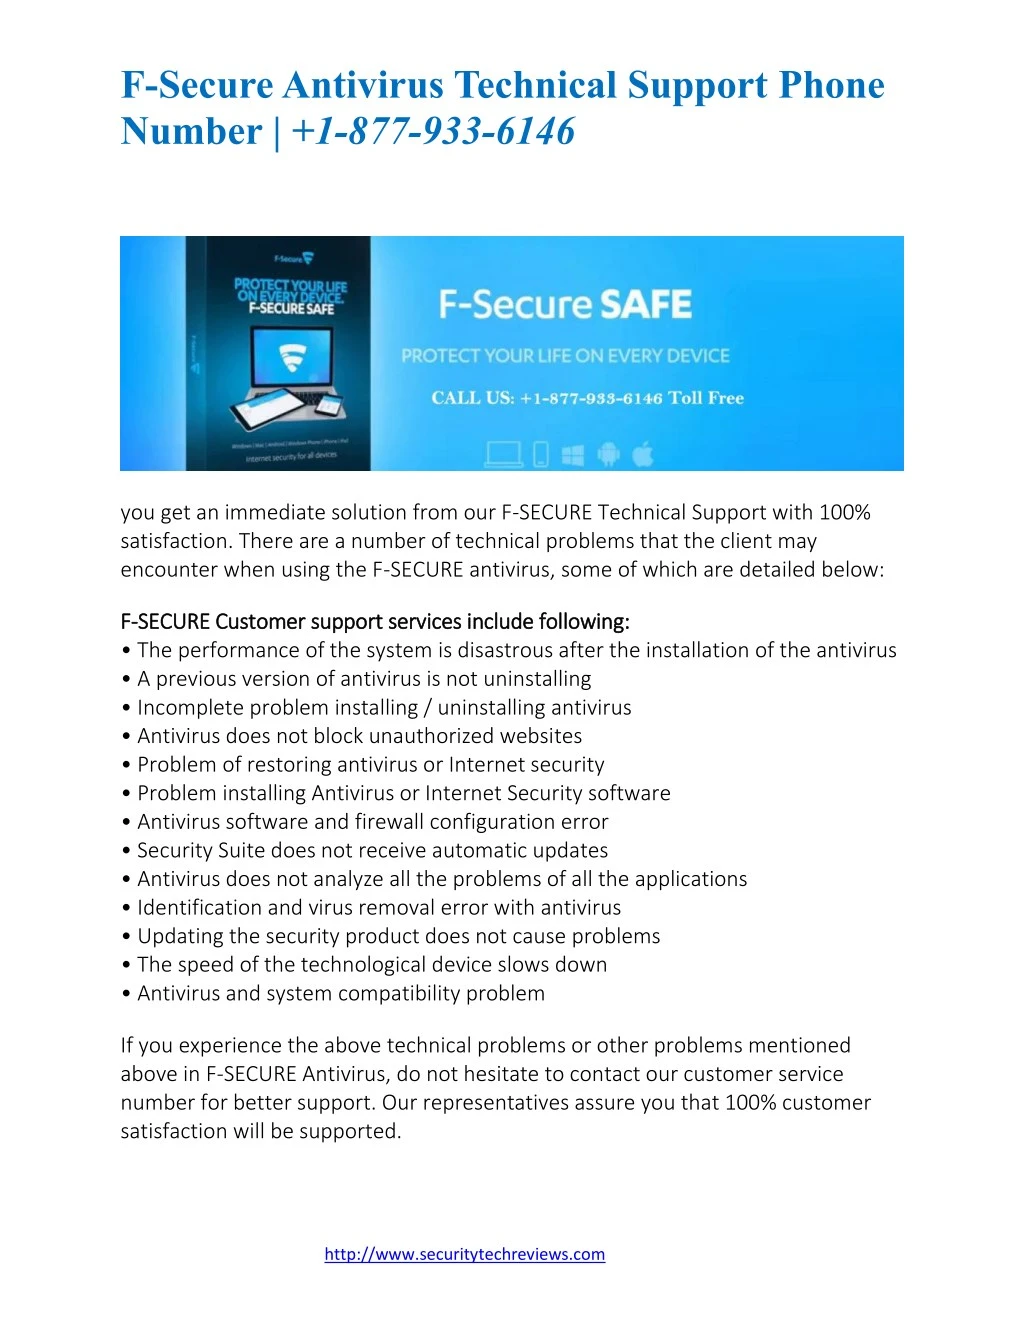 f secure antivirus technical support phone number